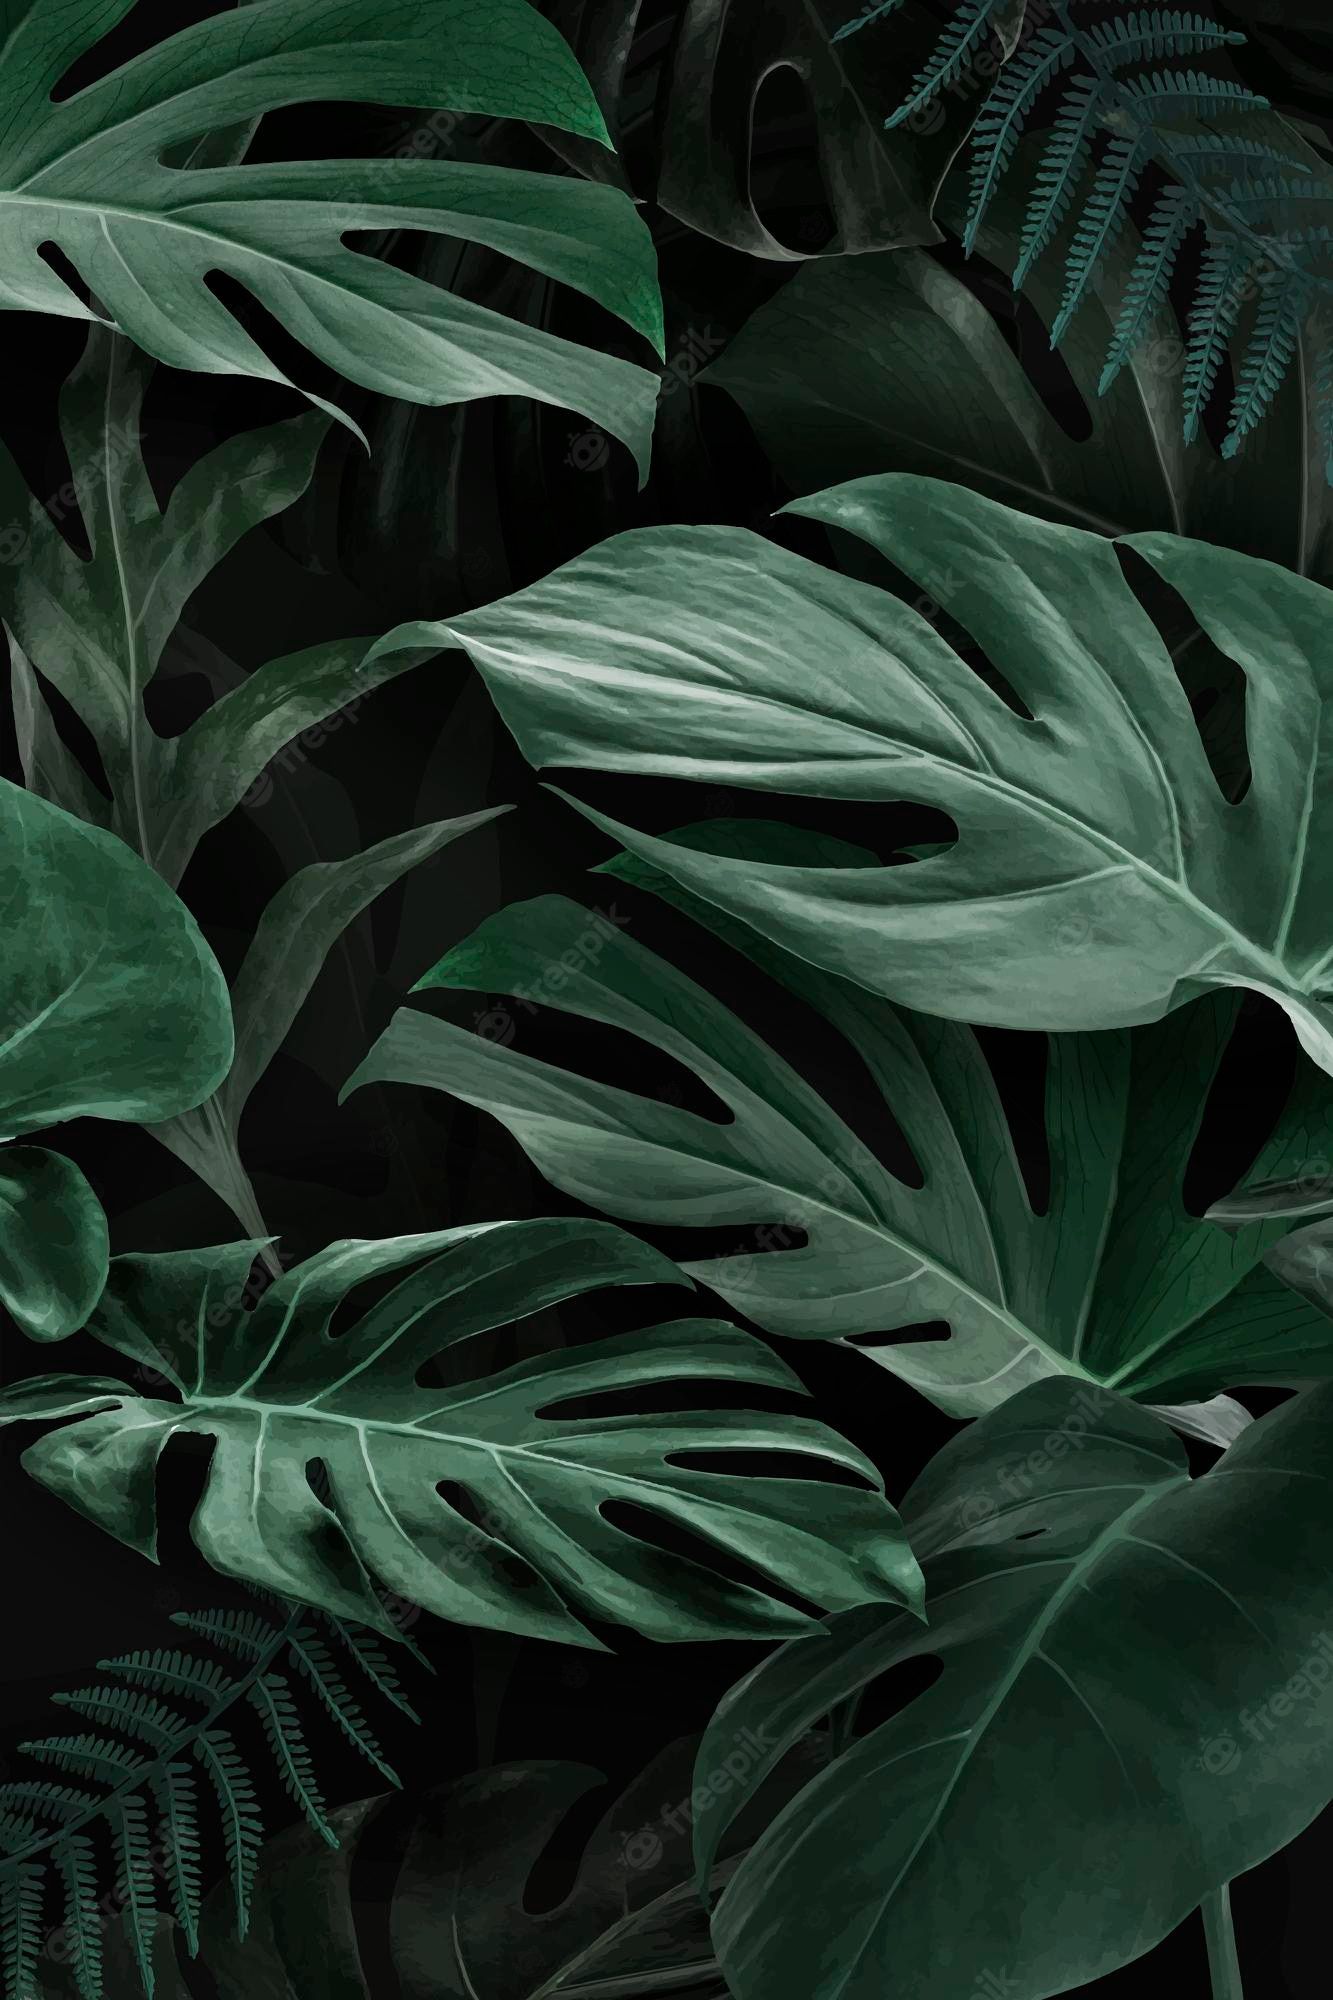 A photo of green leaves on black background - Monstera, plants, leaves, tropical, nature